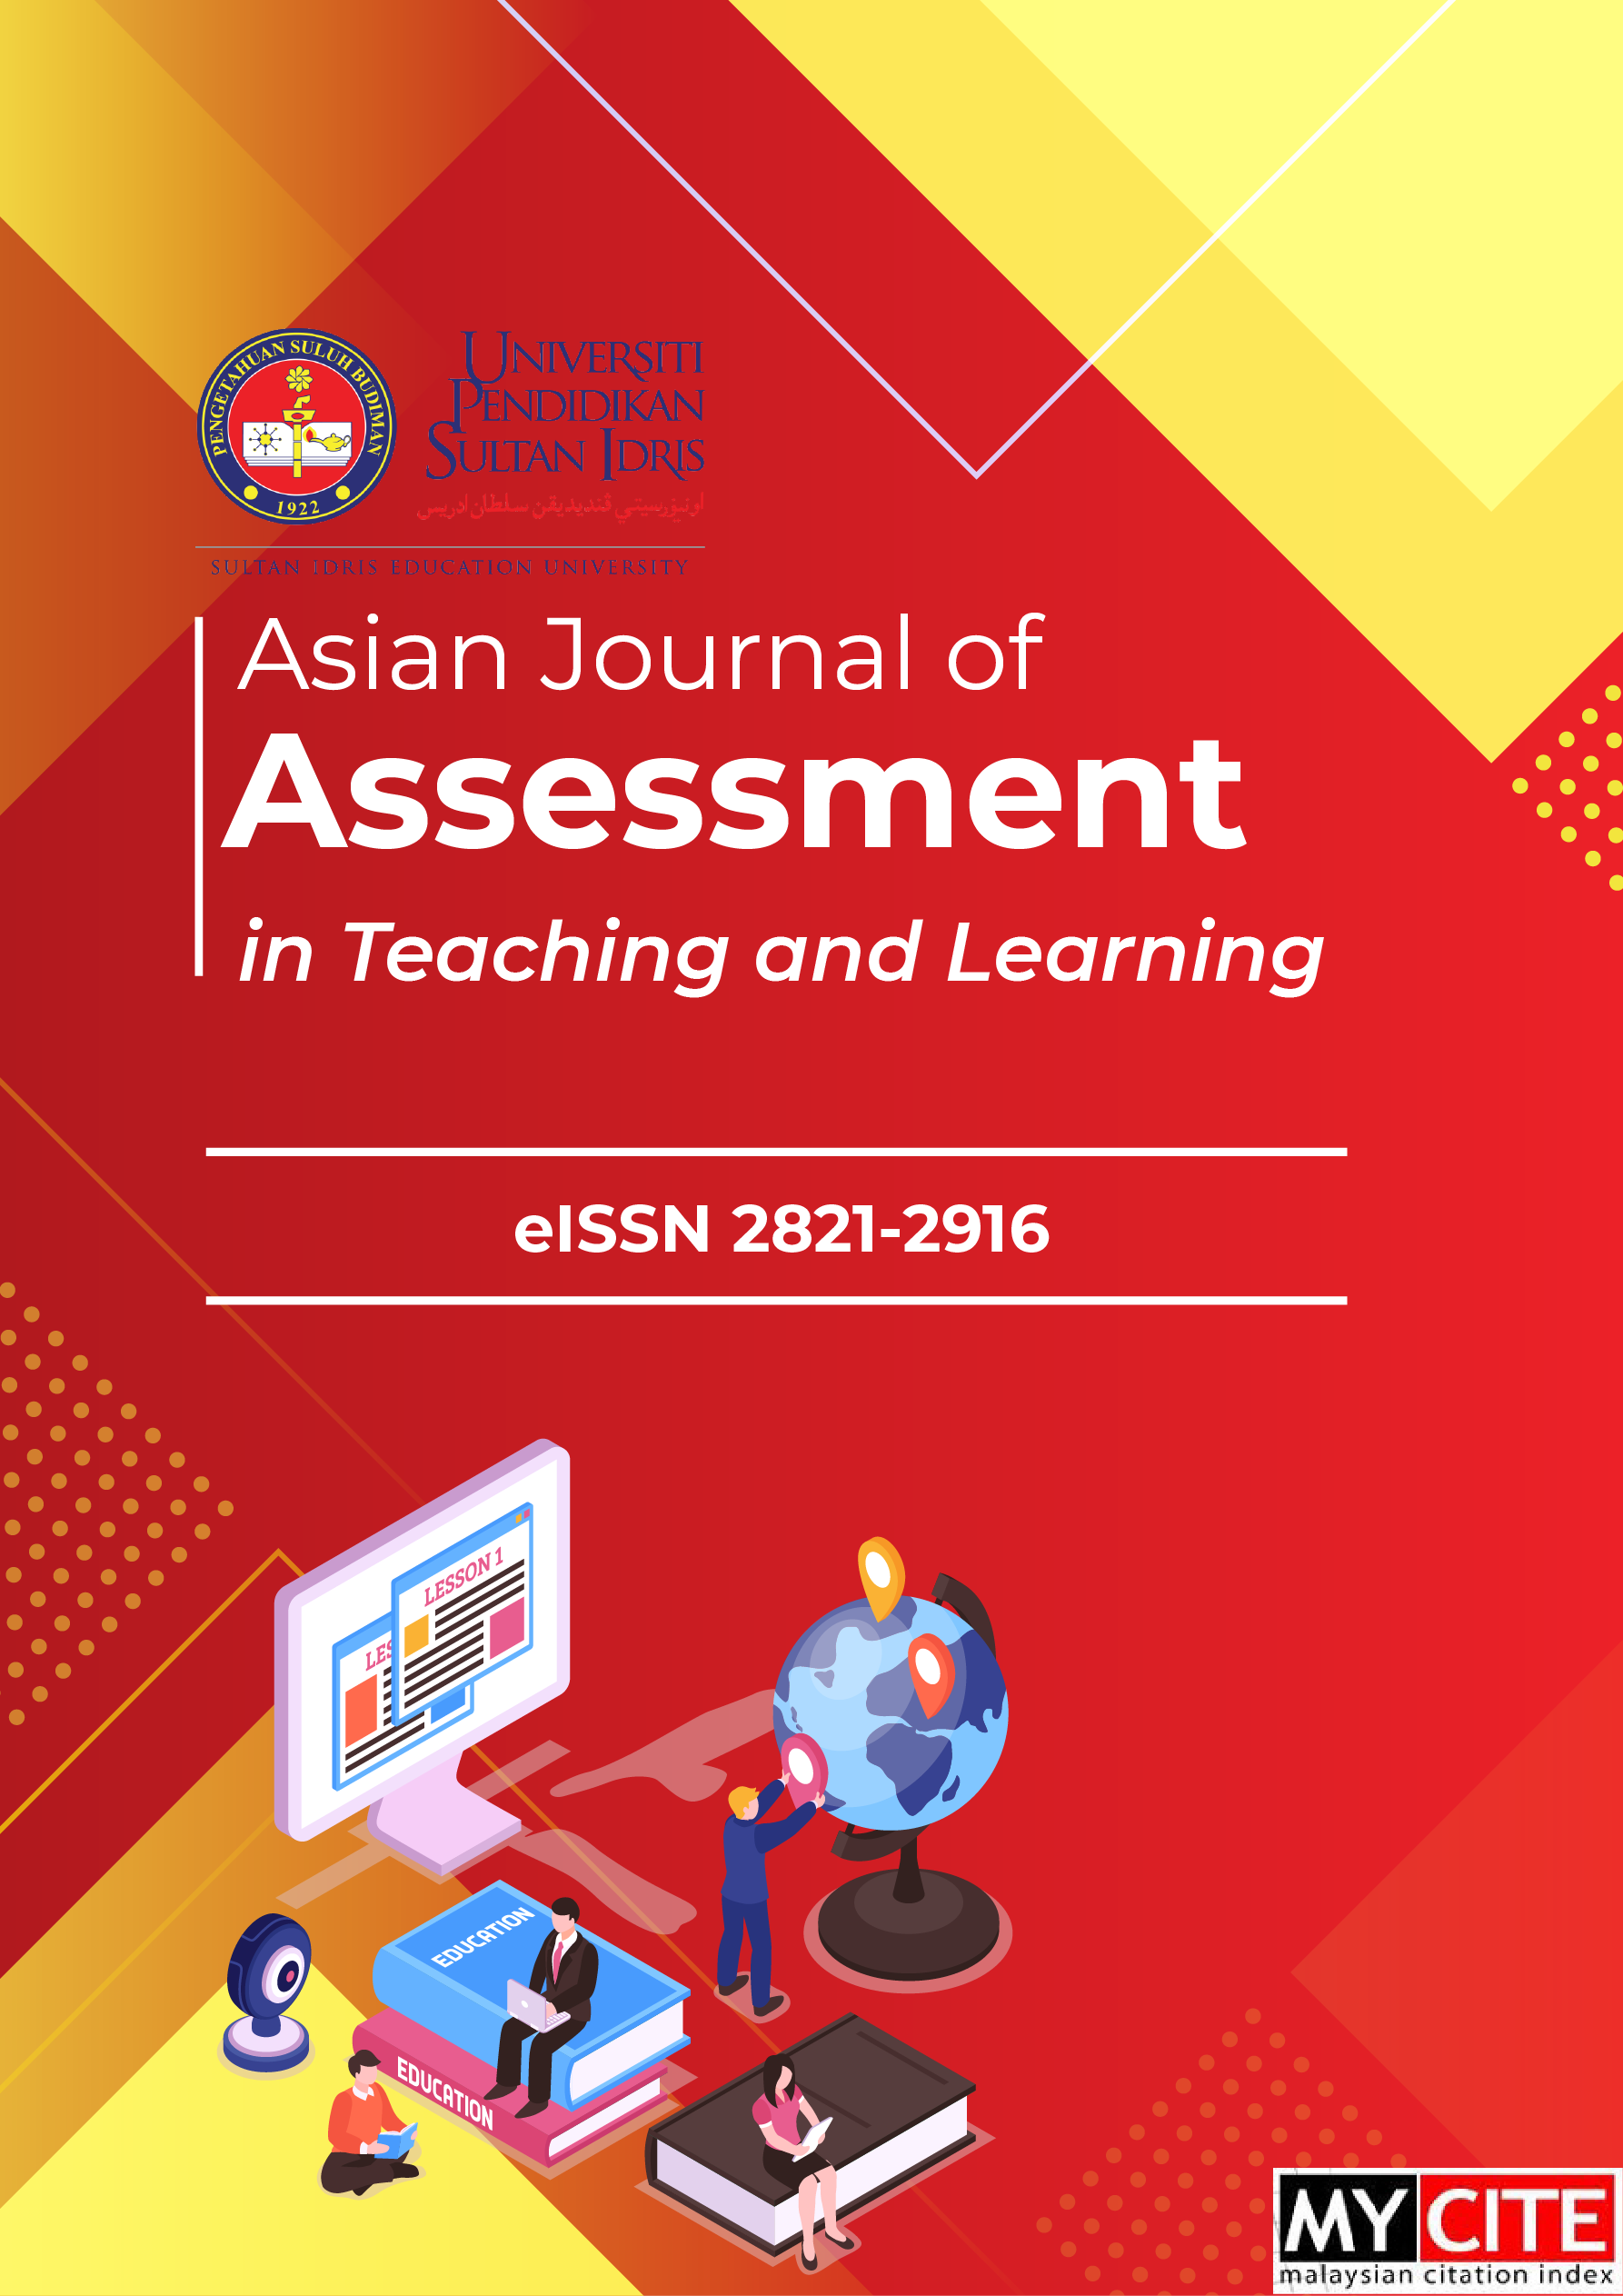 					View Vol. 10 No. 2 (2020): Asian Journal of Assessment in Teaching and Learning
				